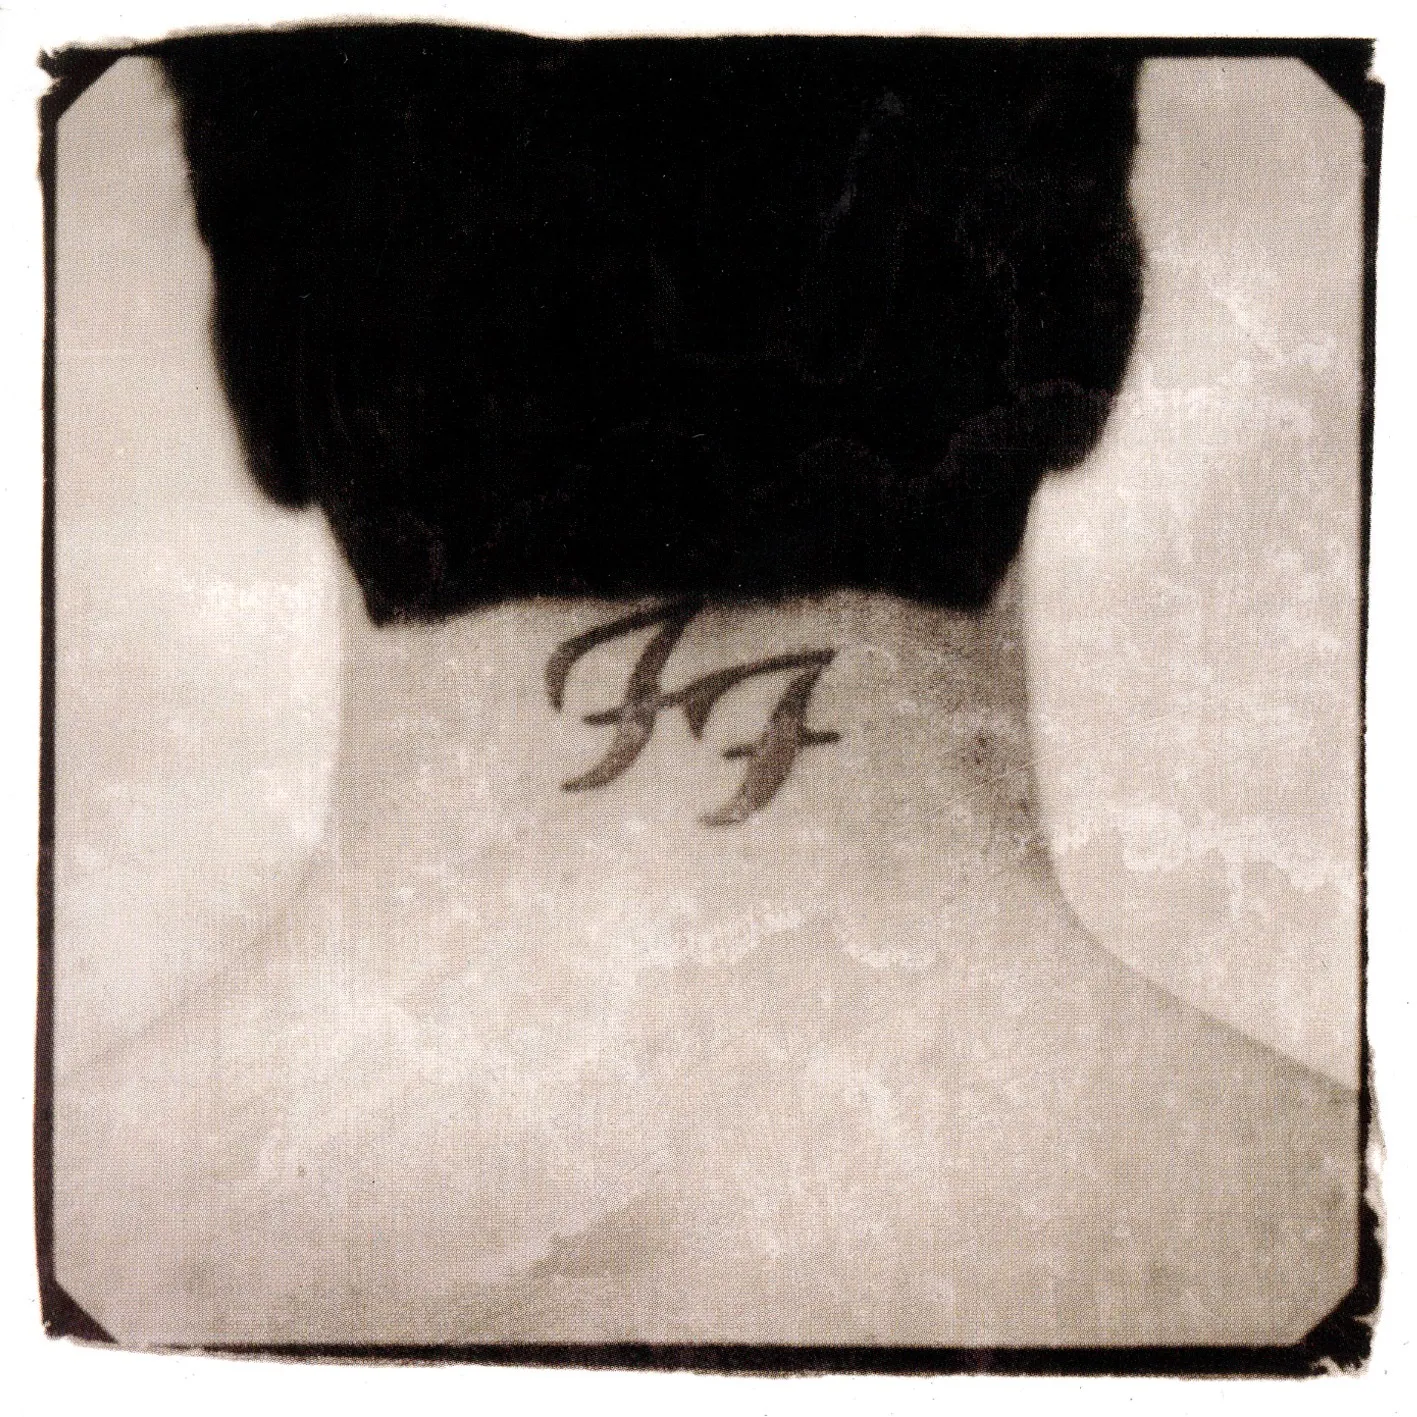 <strong>Foo Fighters - There Is Nothing Left To Lose</strong> (Vinyl LP - black)